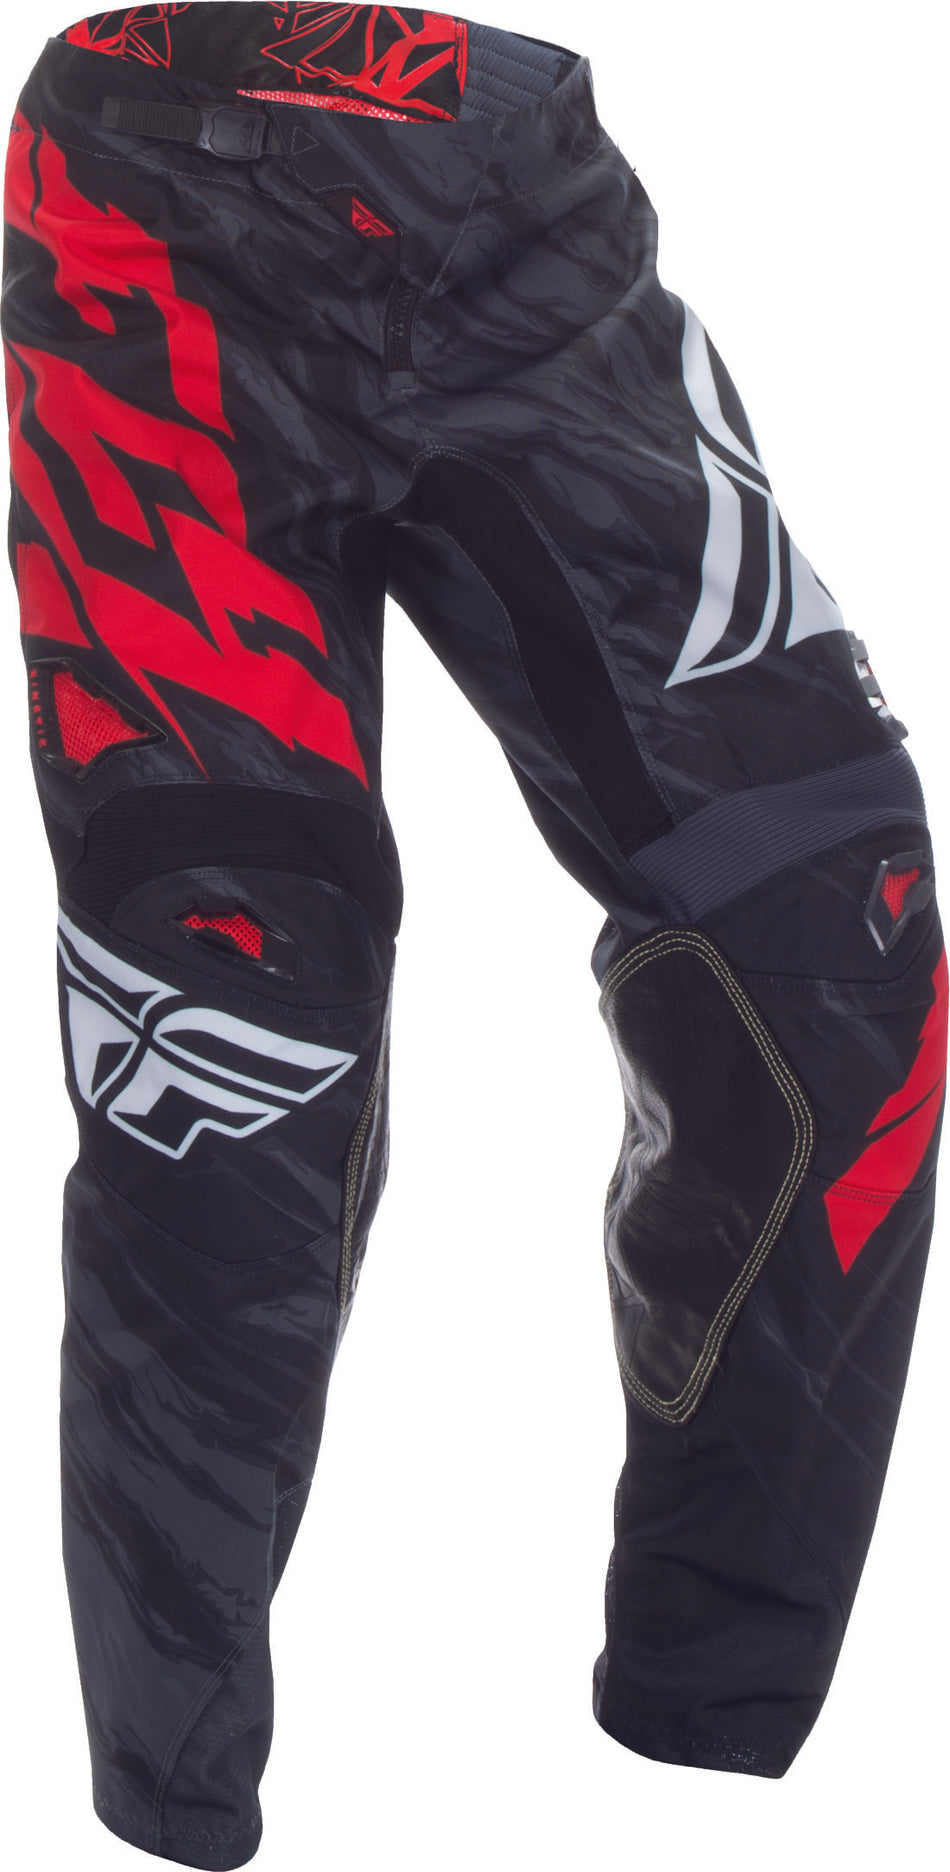 FLY RACING Kinetic Relapse Pant Black/Red Sz 38 370-43038